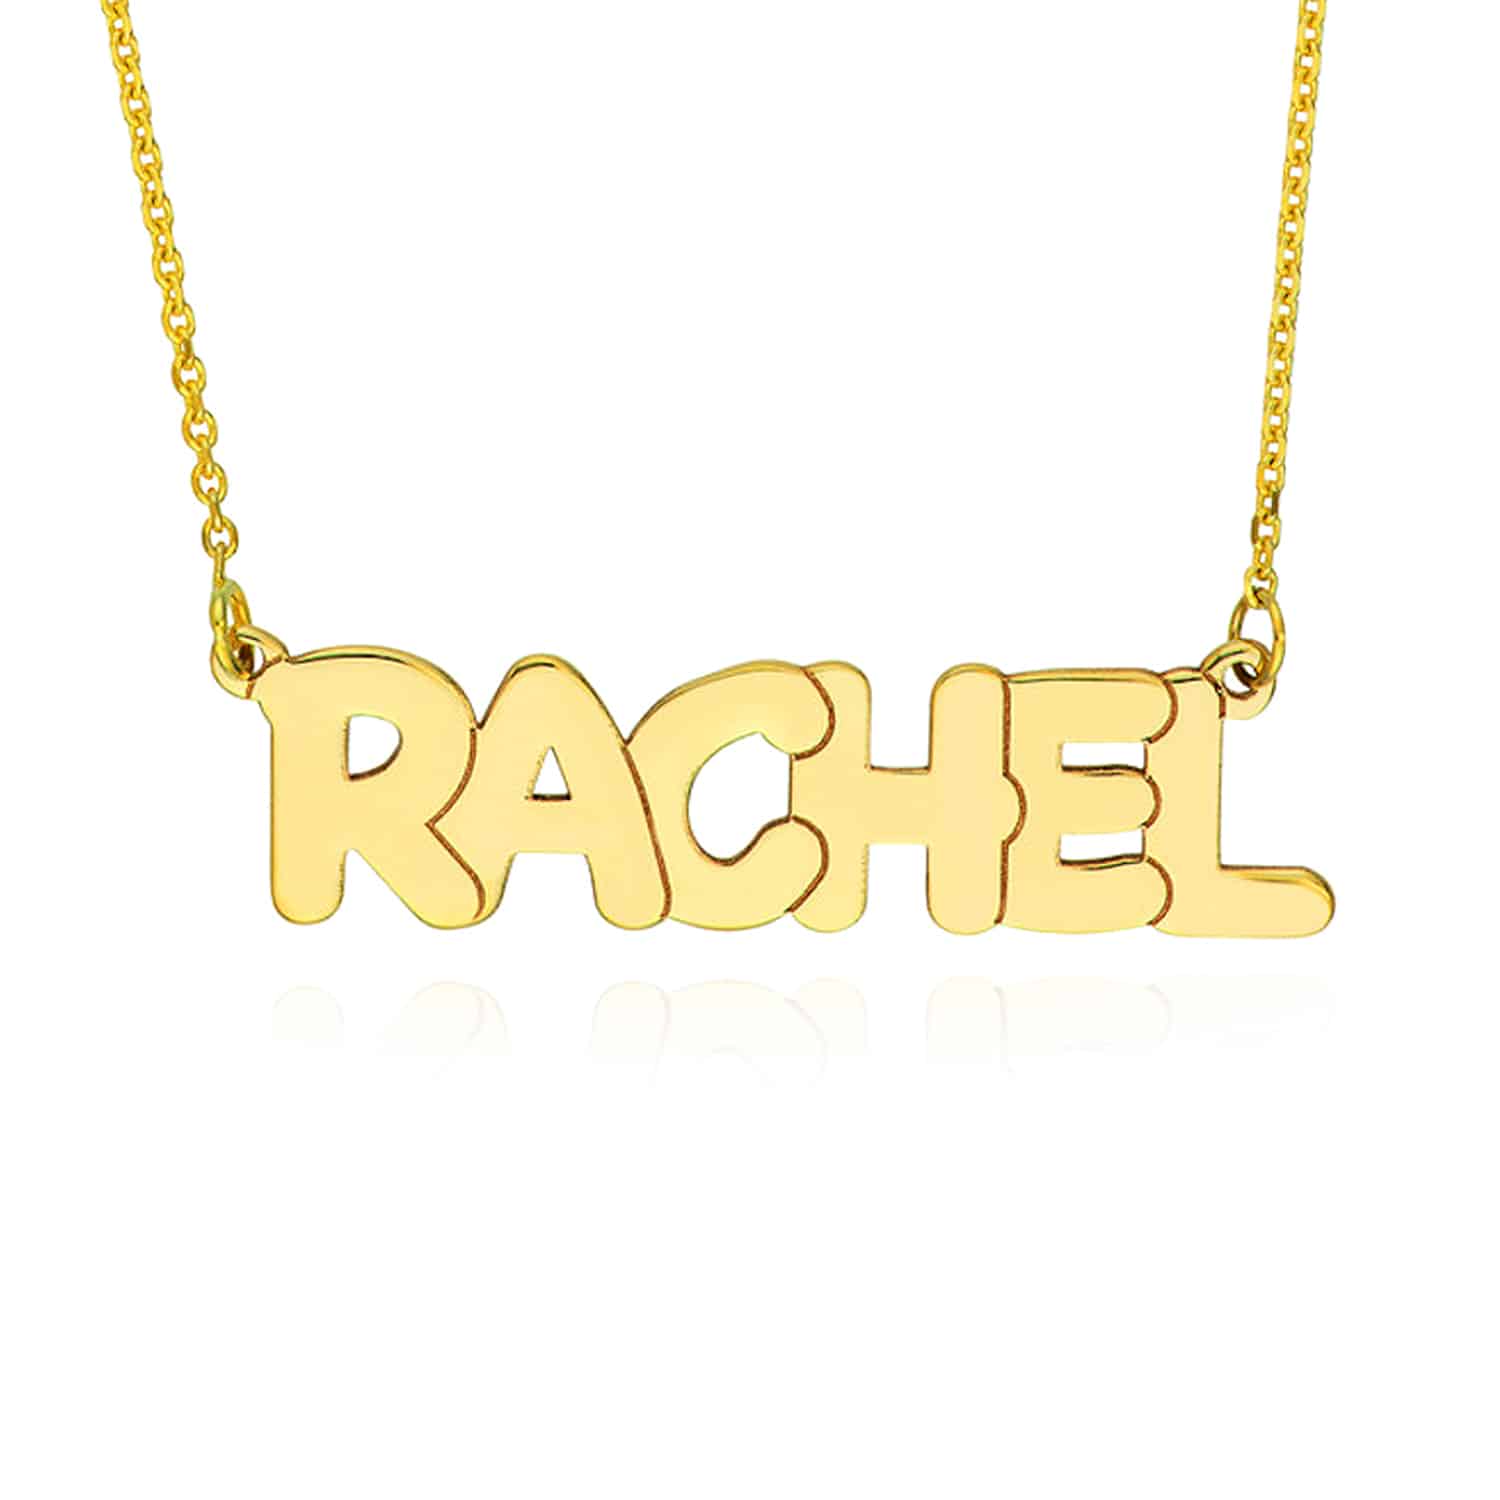 Customizable 14K Gold Yellow White Rose Bubble Style Nameplate Pendant Necklace - Yellow Gold, 14"-16" Adjustable